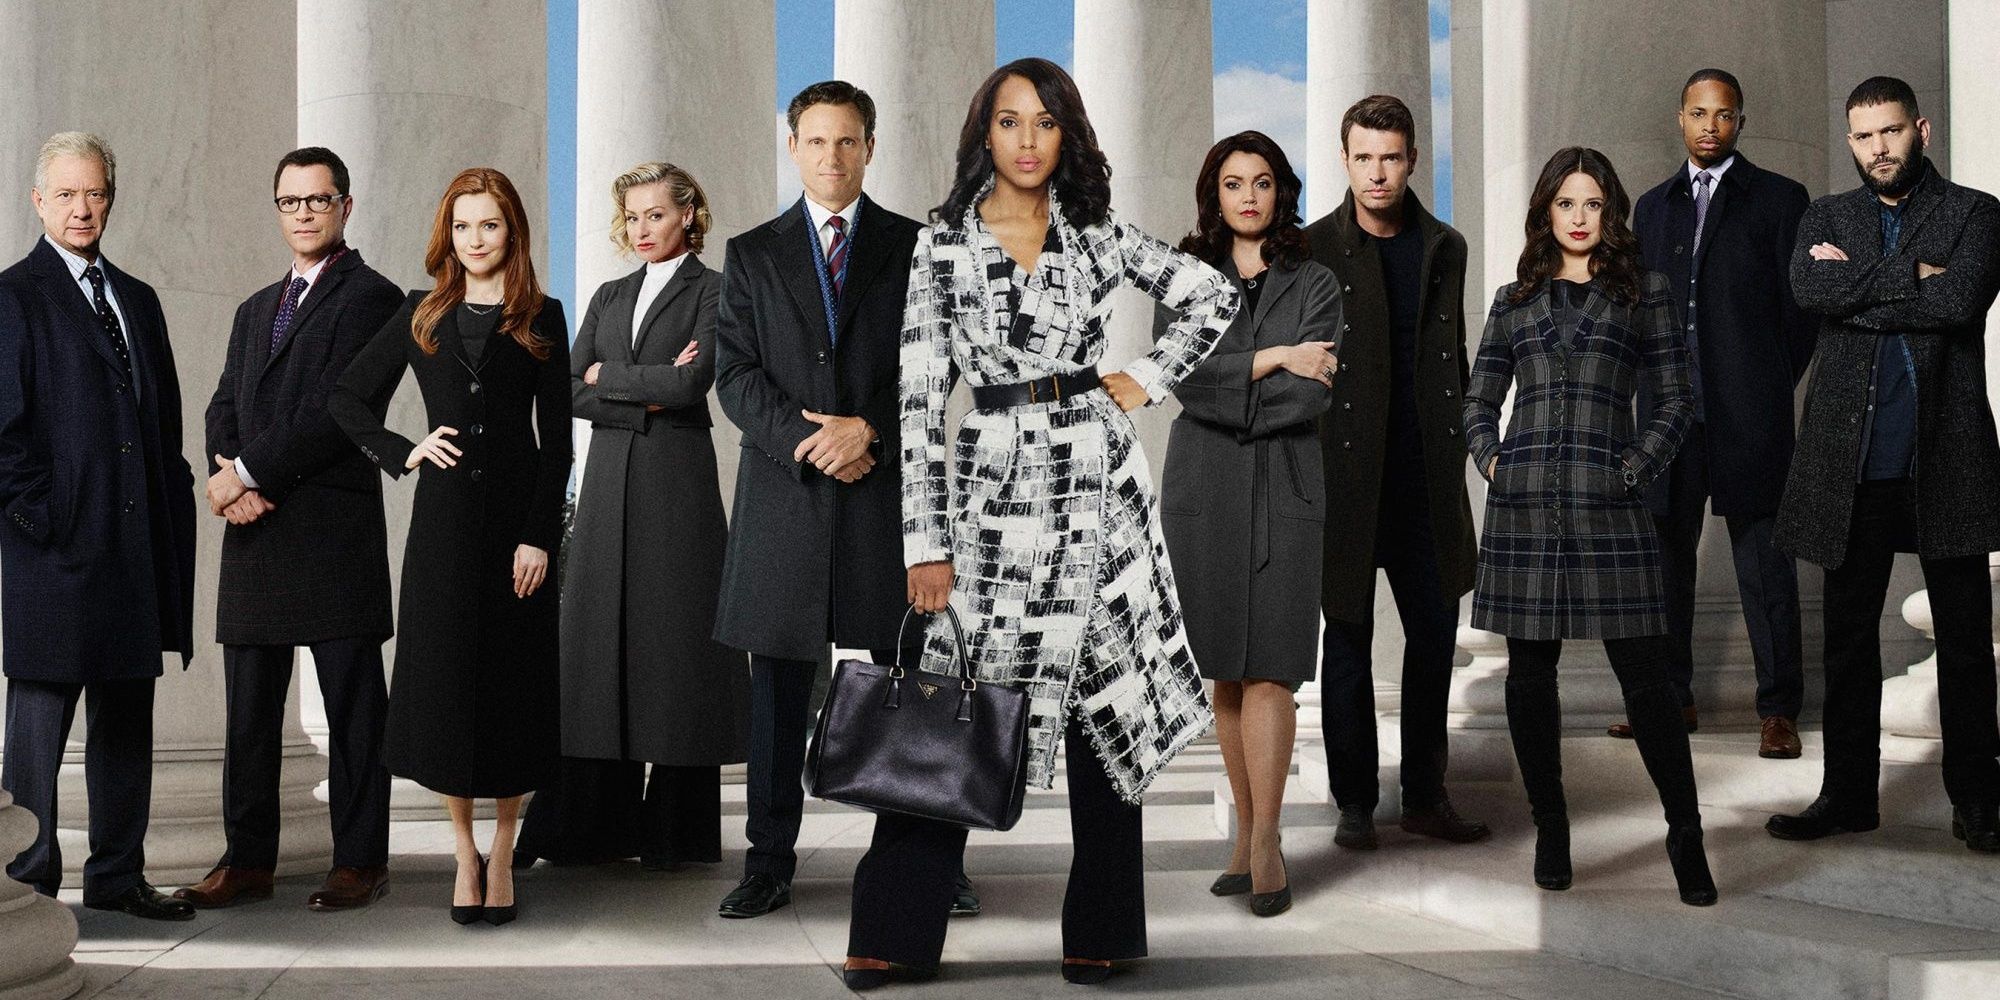 The cast of Scandal wearing black and white suits and jackets in front of the Capitol columns